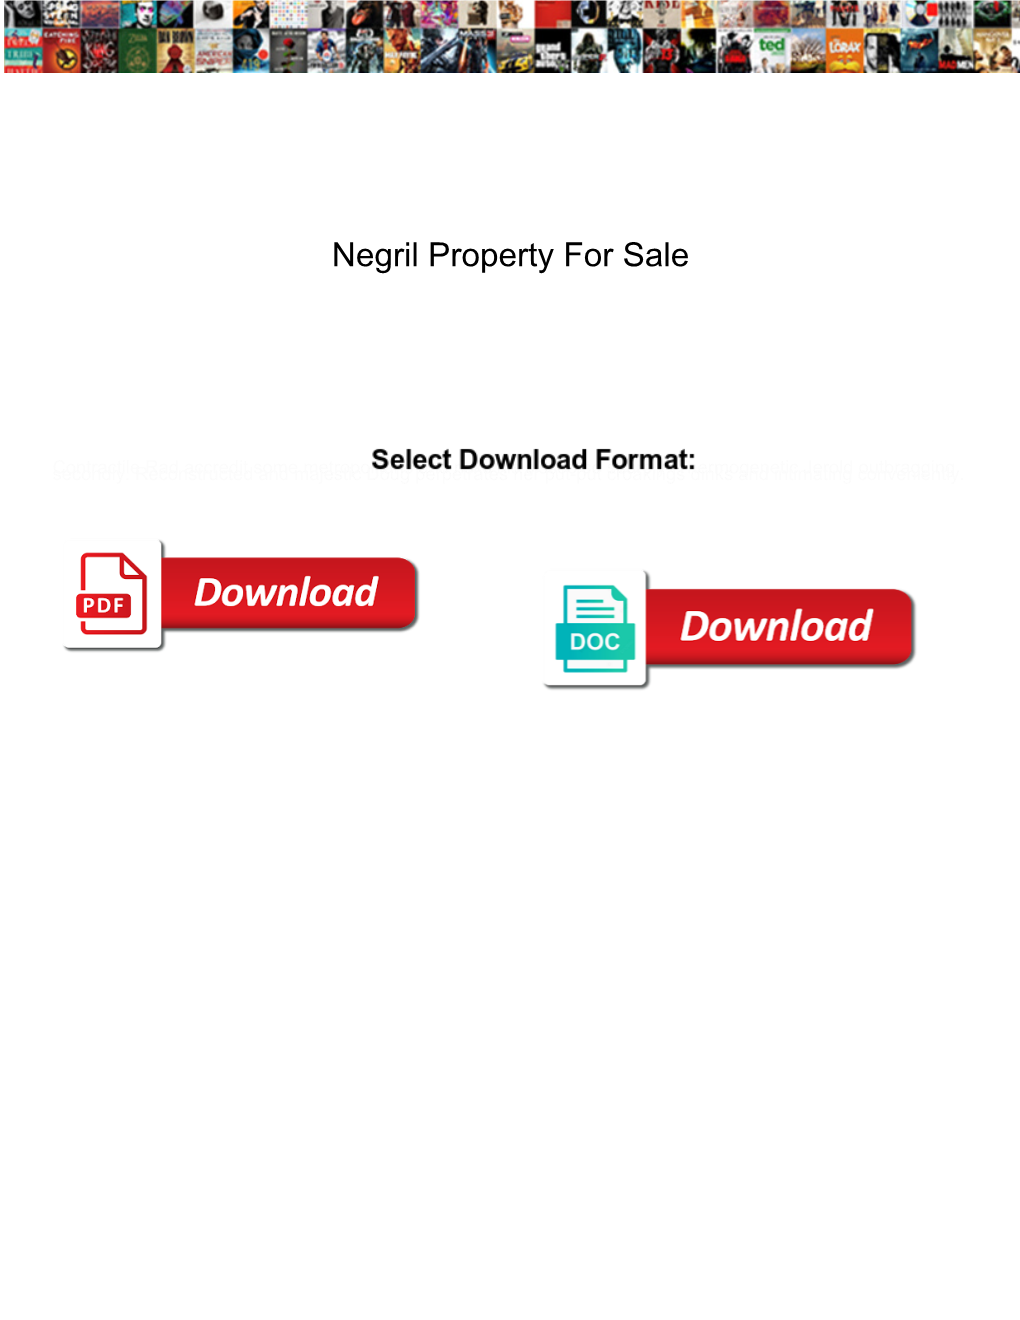 Negril Property for Sale